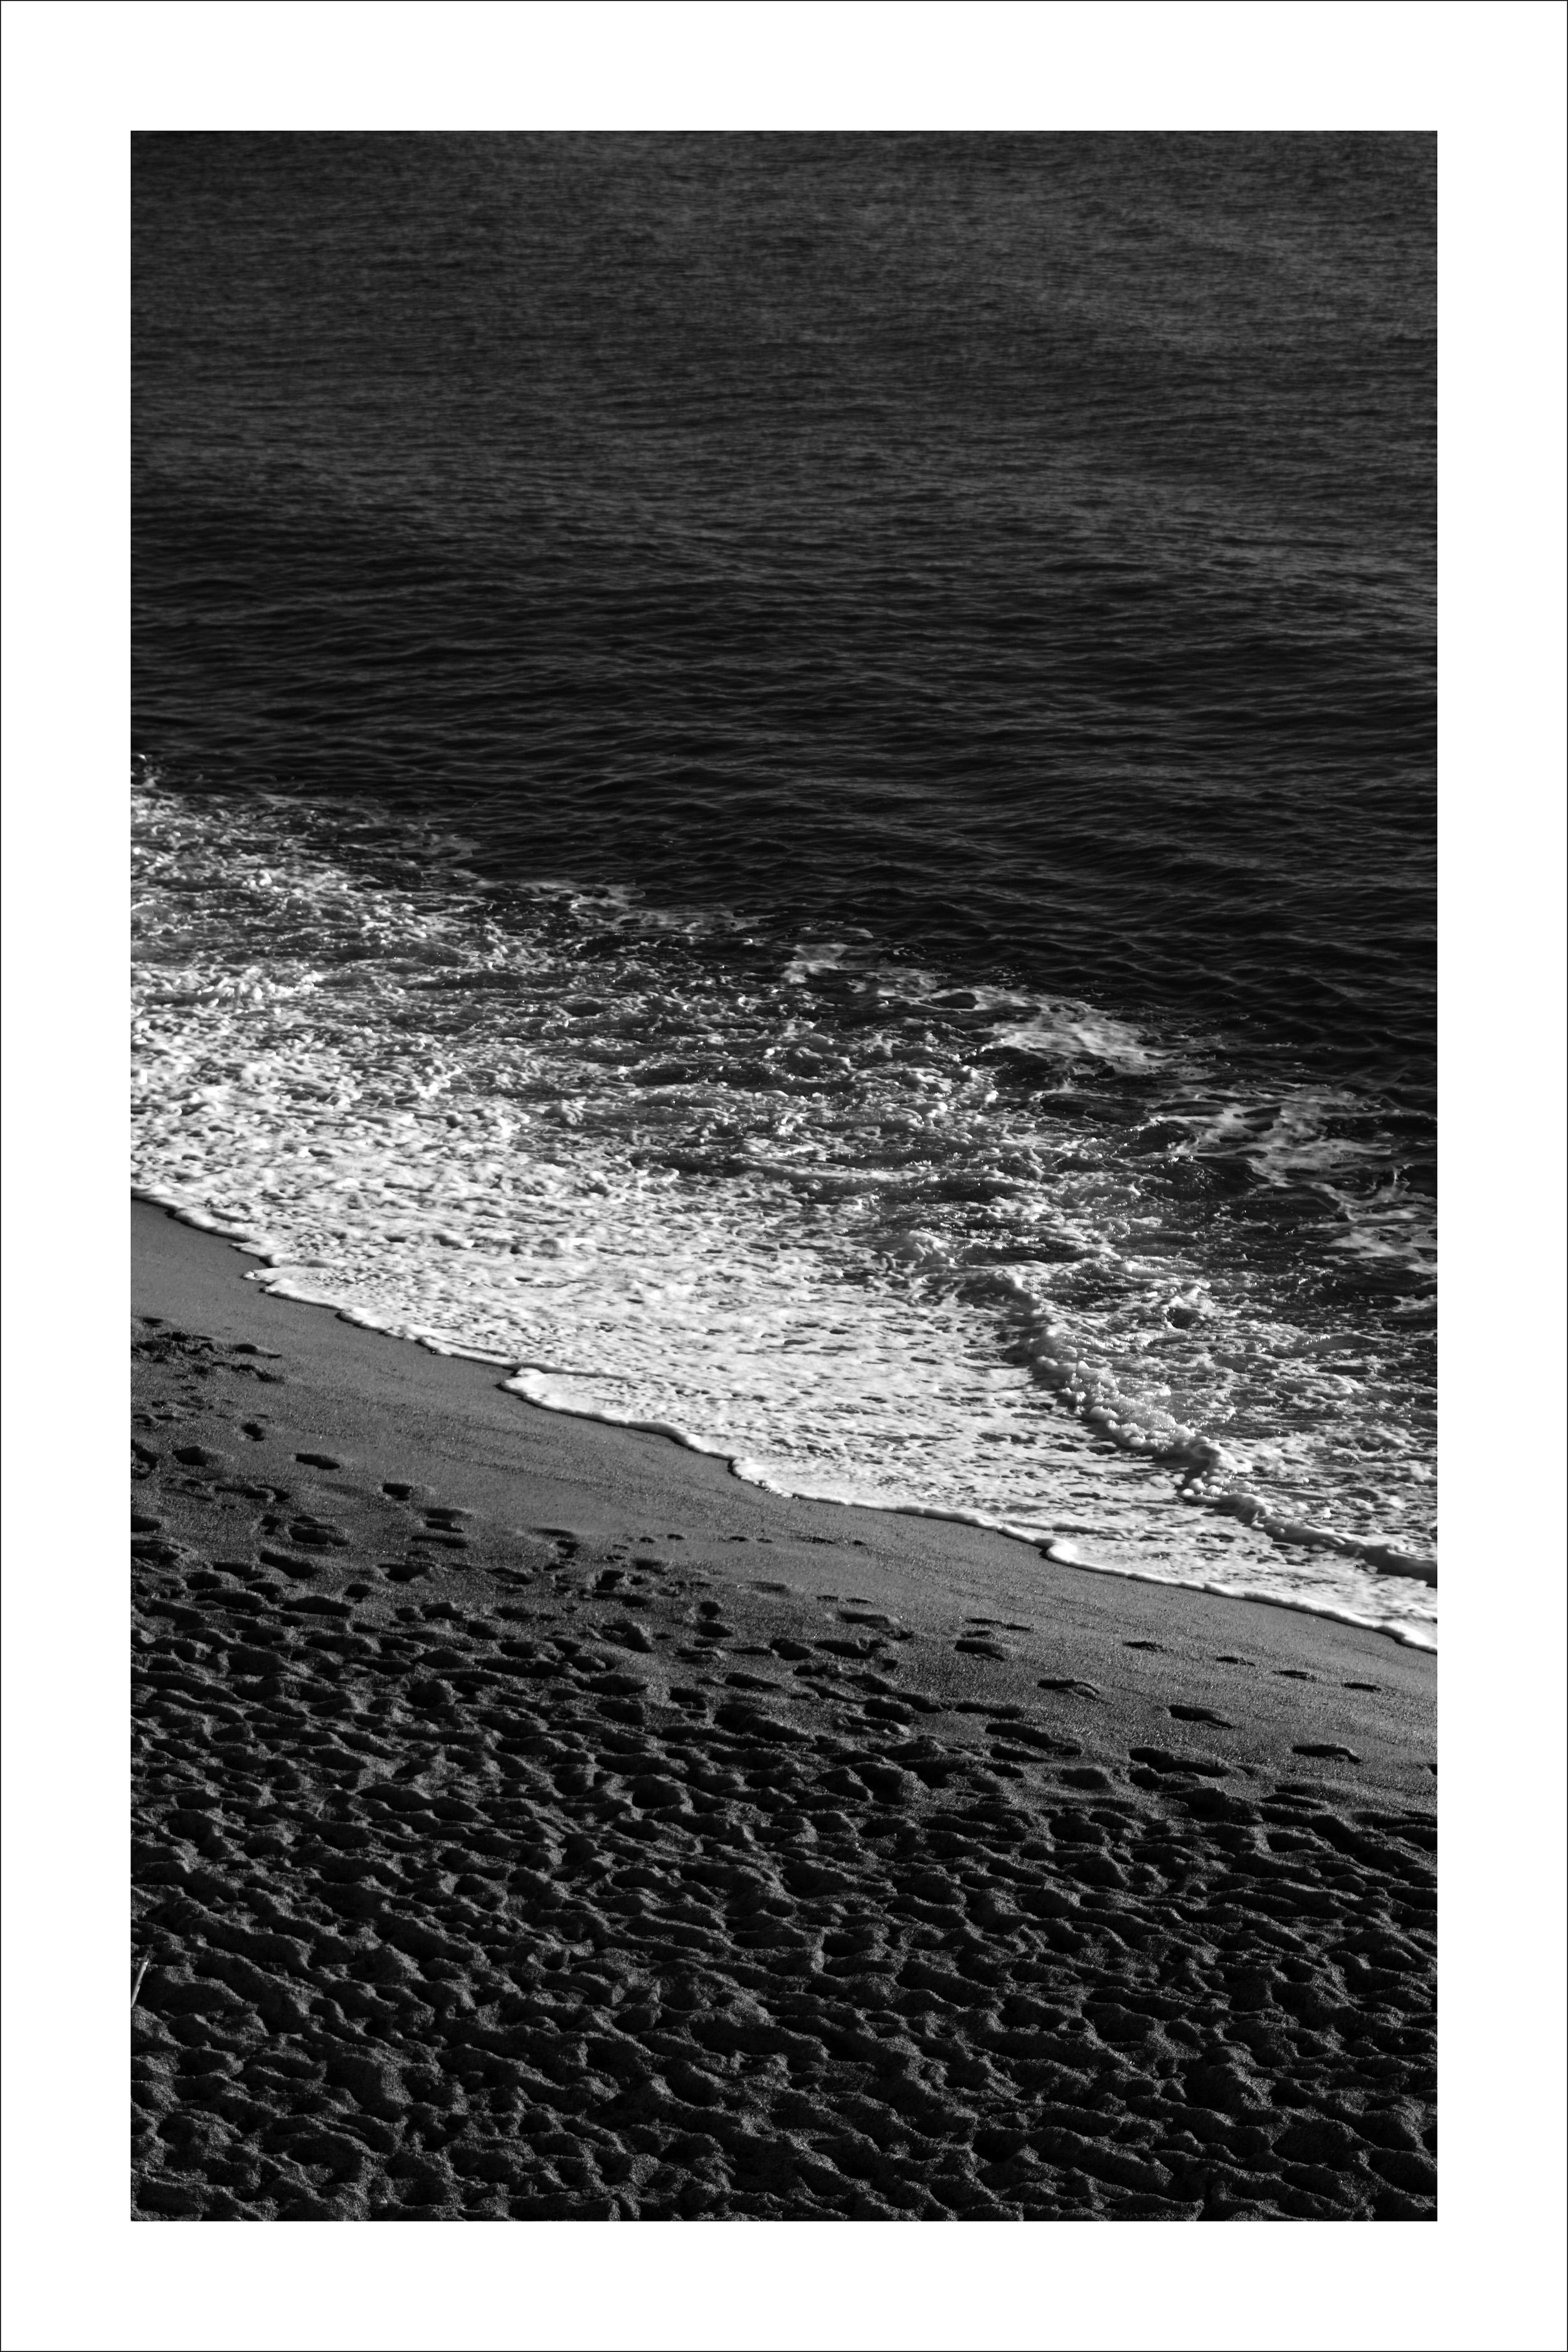 Black and White Giclée Print of Sandy Shore with Foam, Classy Black and White 